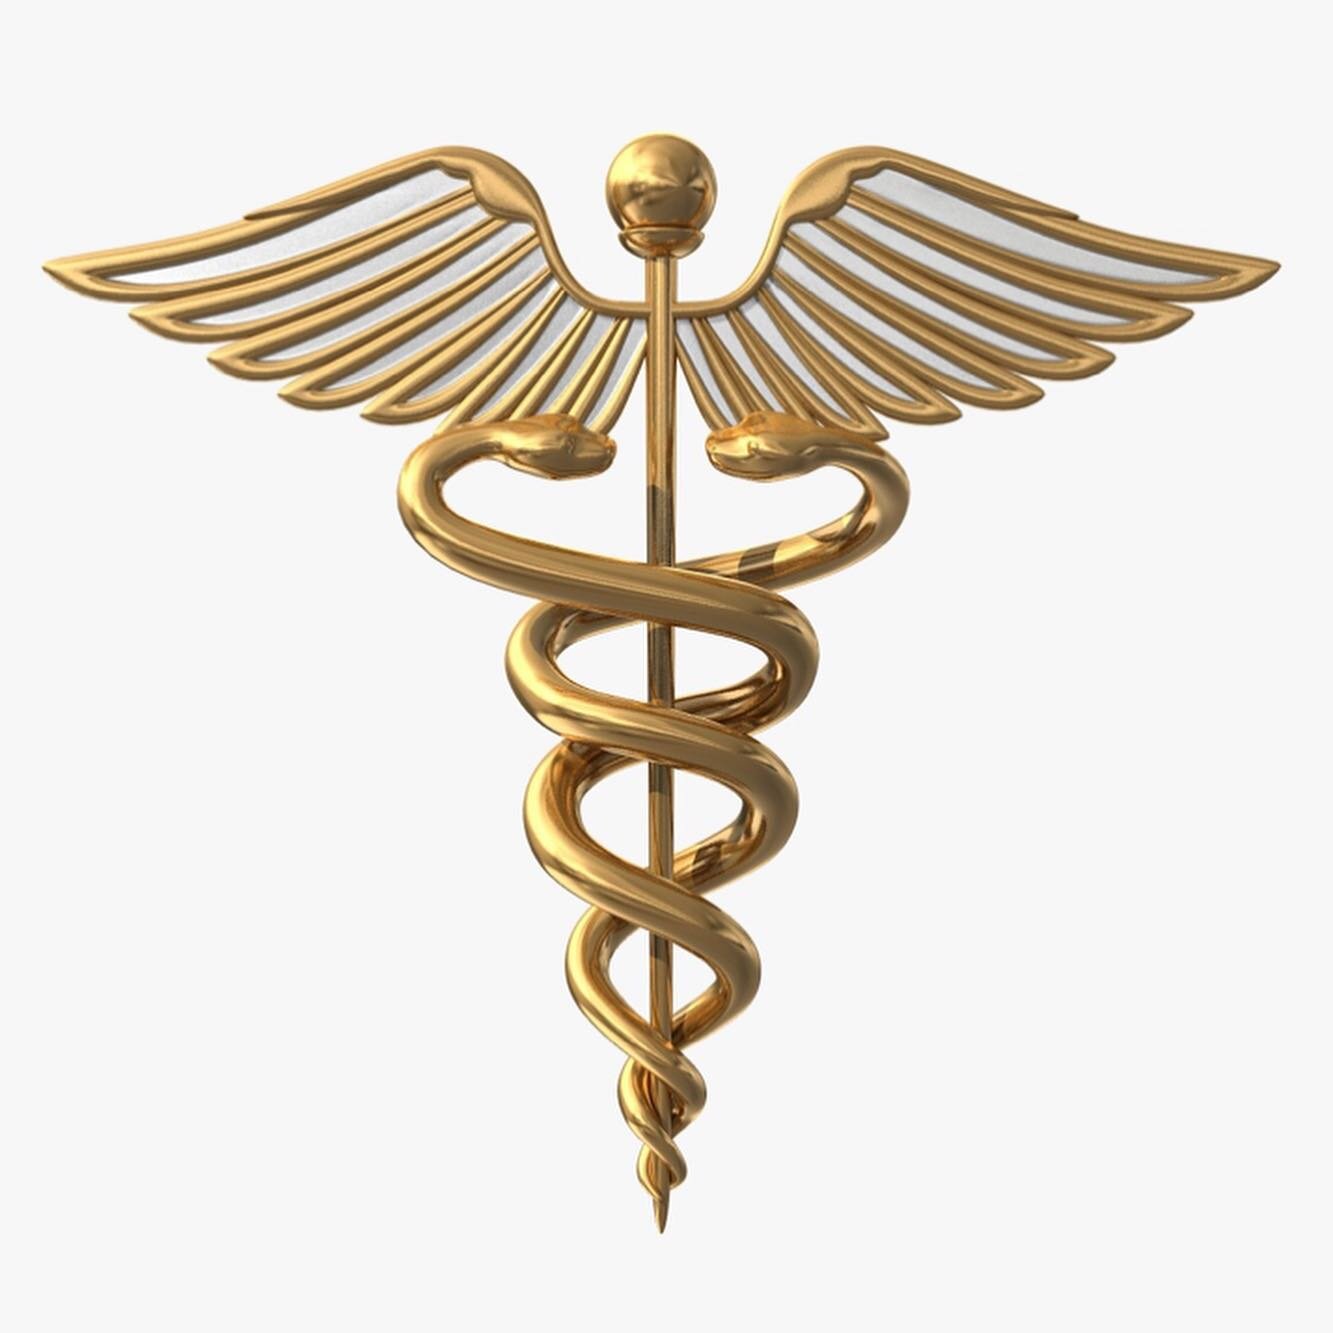 Caduceus - Cadu/Zeus - The Fall of/from Zeus ⚡️ 
In Greek mythology, we are told that one of the children of Zeus will overthrow him 
(a common theme in Greek Mythology!) 👶 
It is for this reason that Zeus consumed his first wife, Metis (an oceanid 